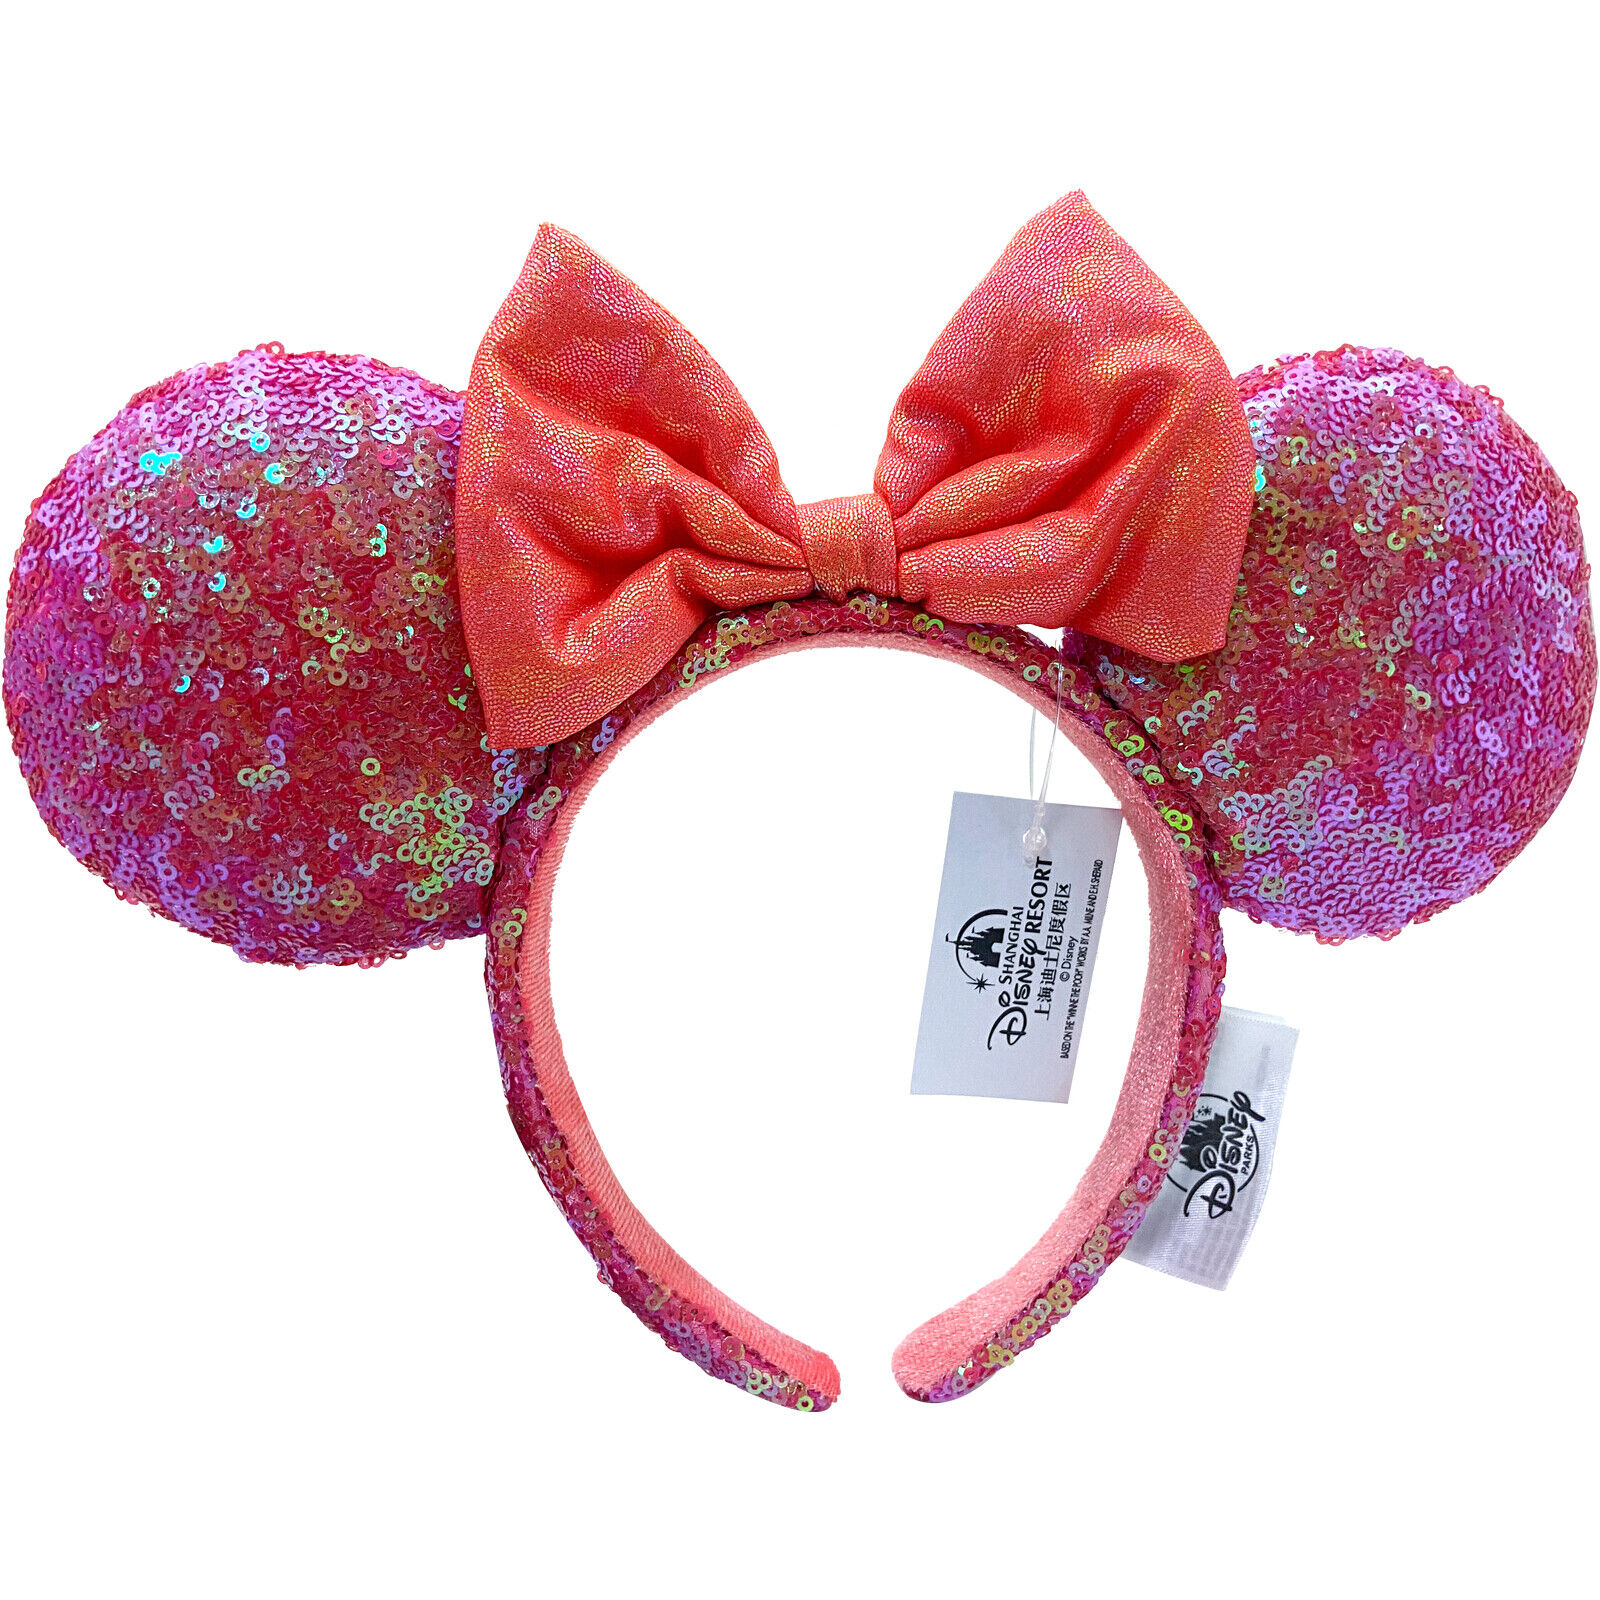 DisneyParks Red Orange Sequin Minnie Mouse Bow Sequins Ears Headband Ears New